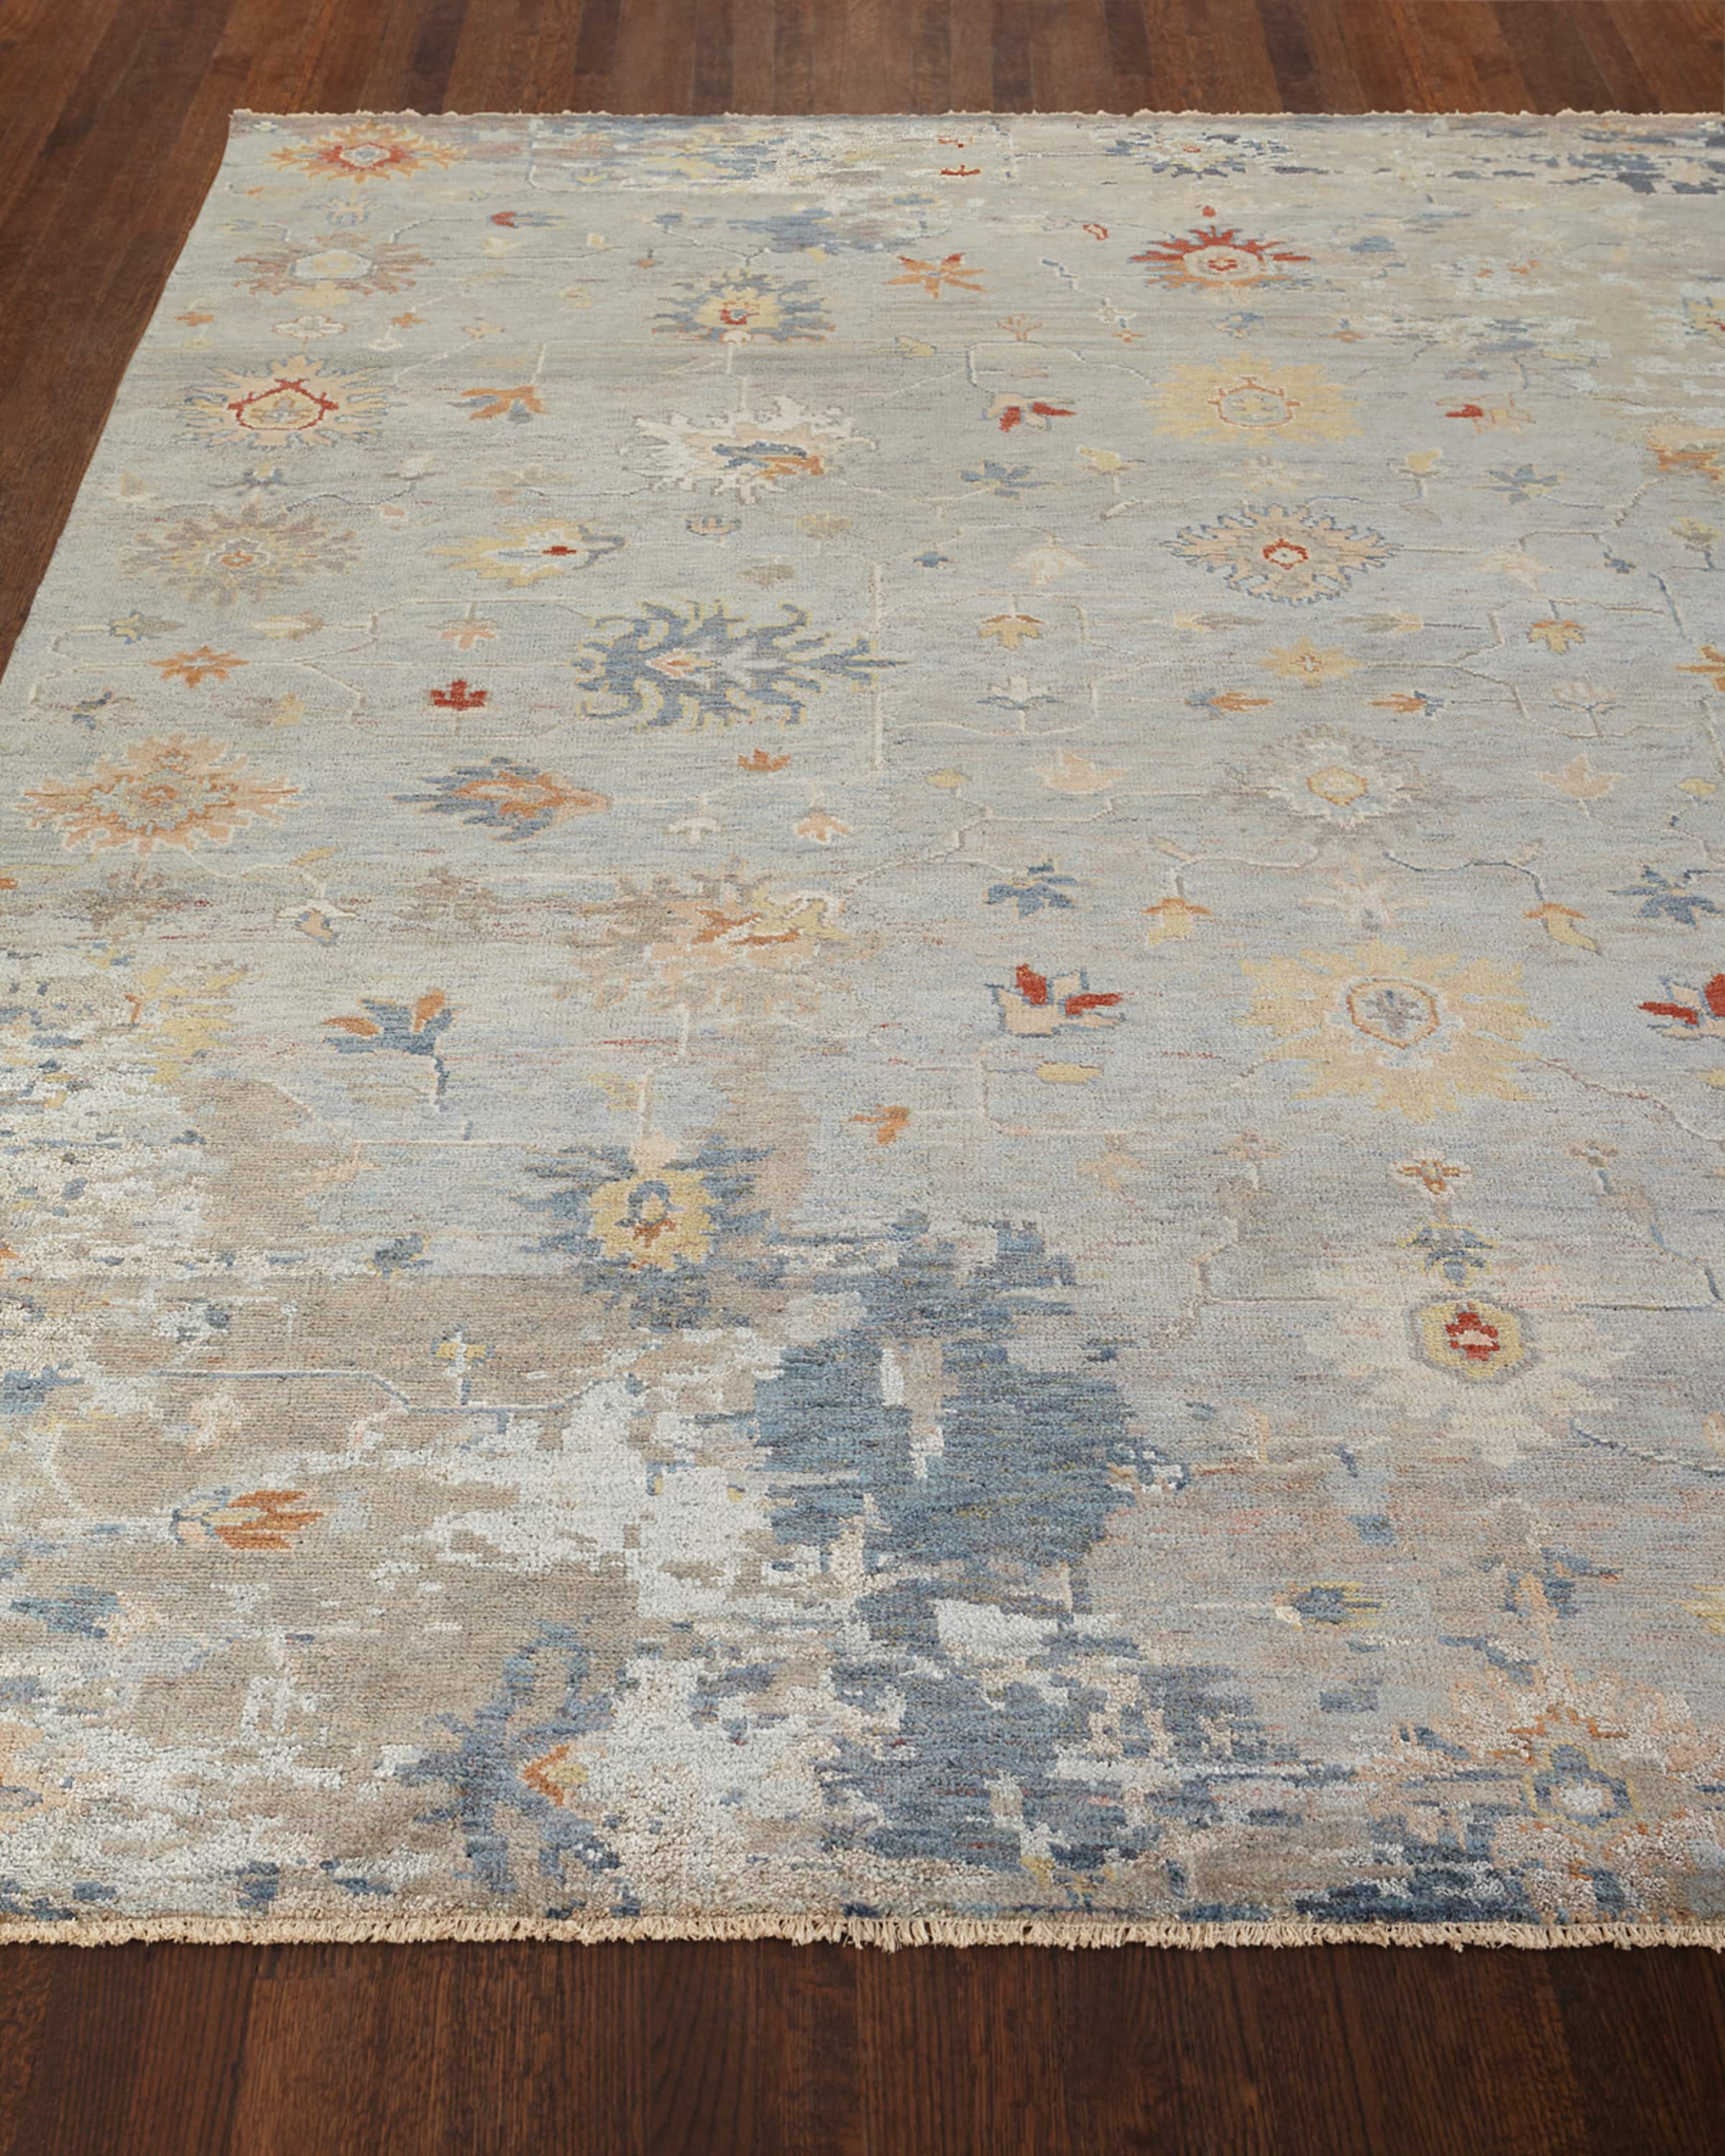 Deleese Hand-Knotted Runner, 3' x 10'